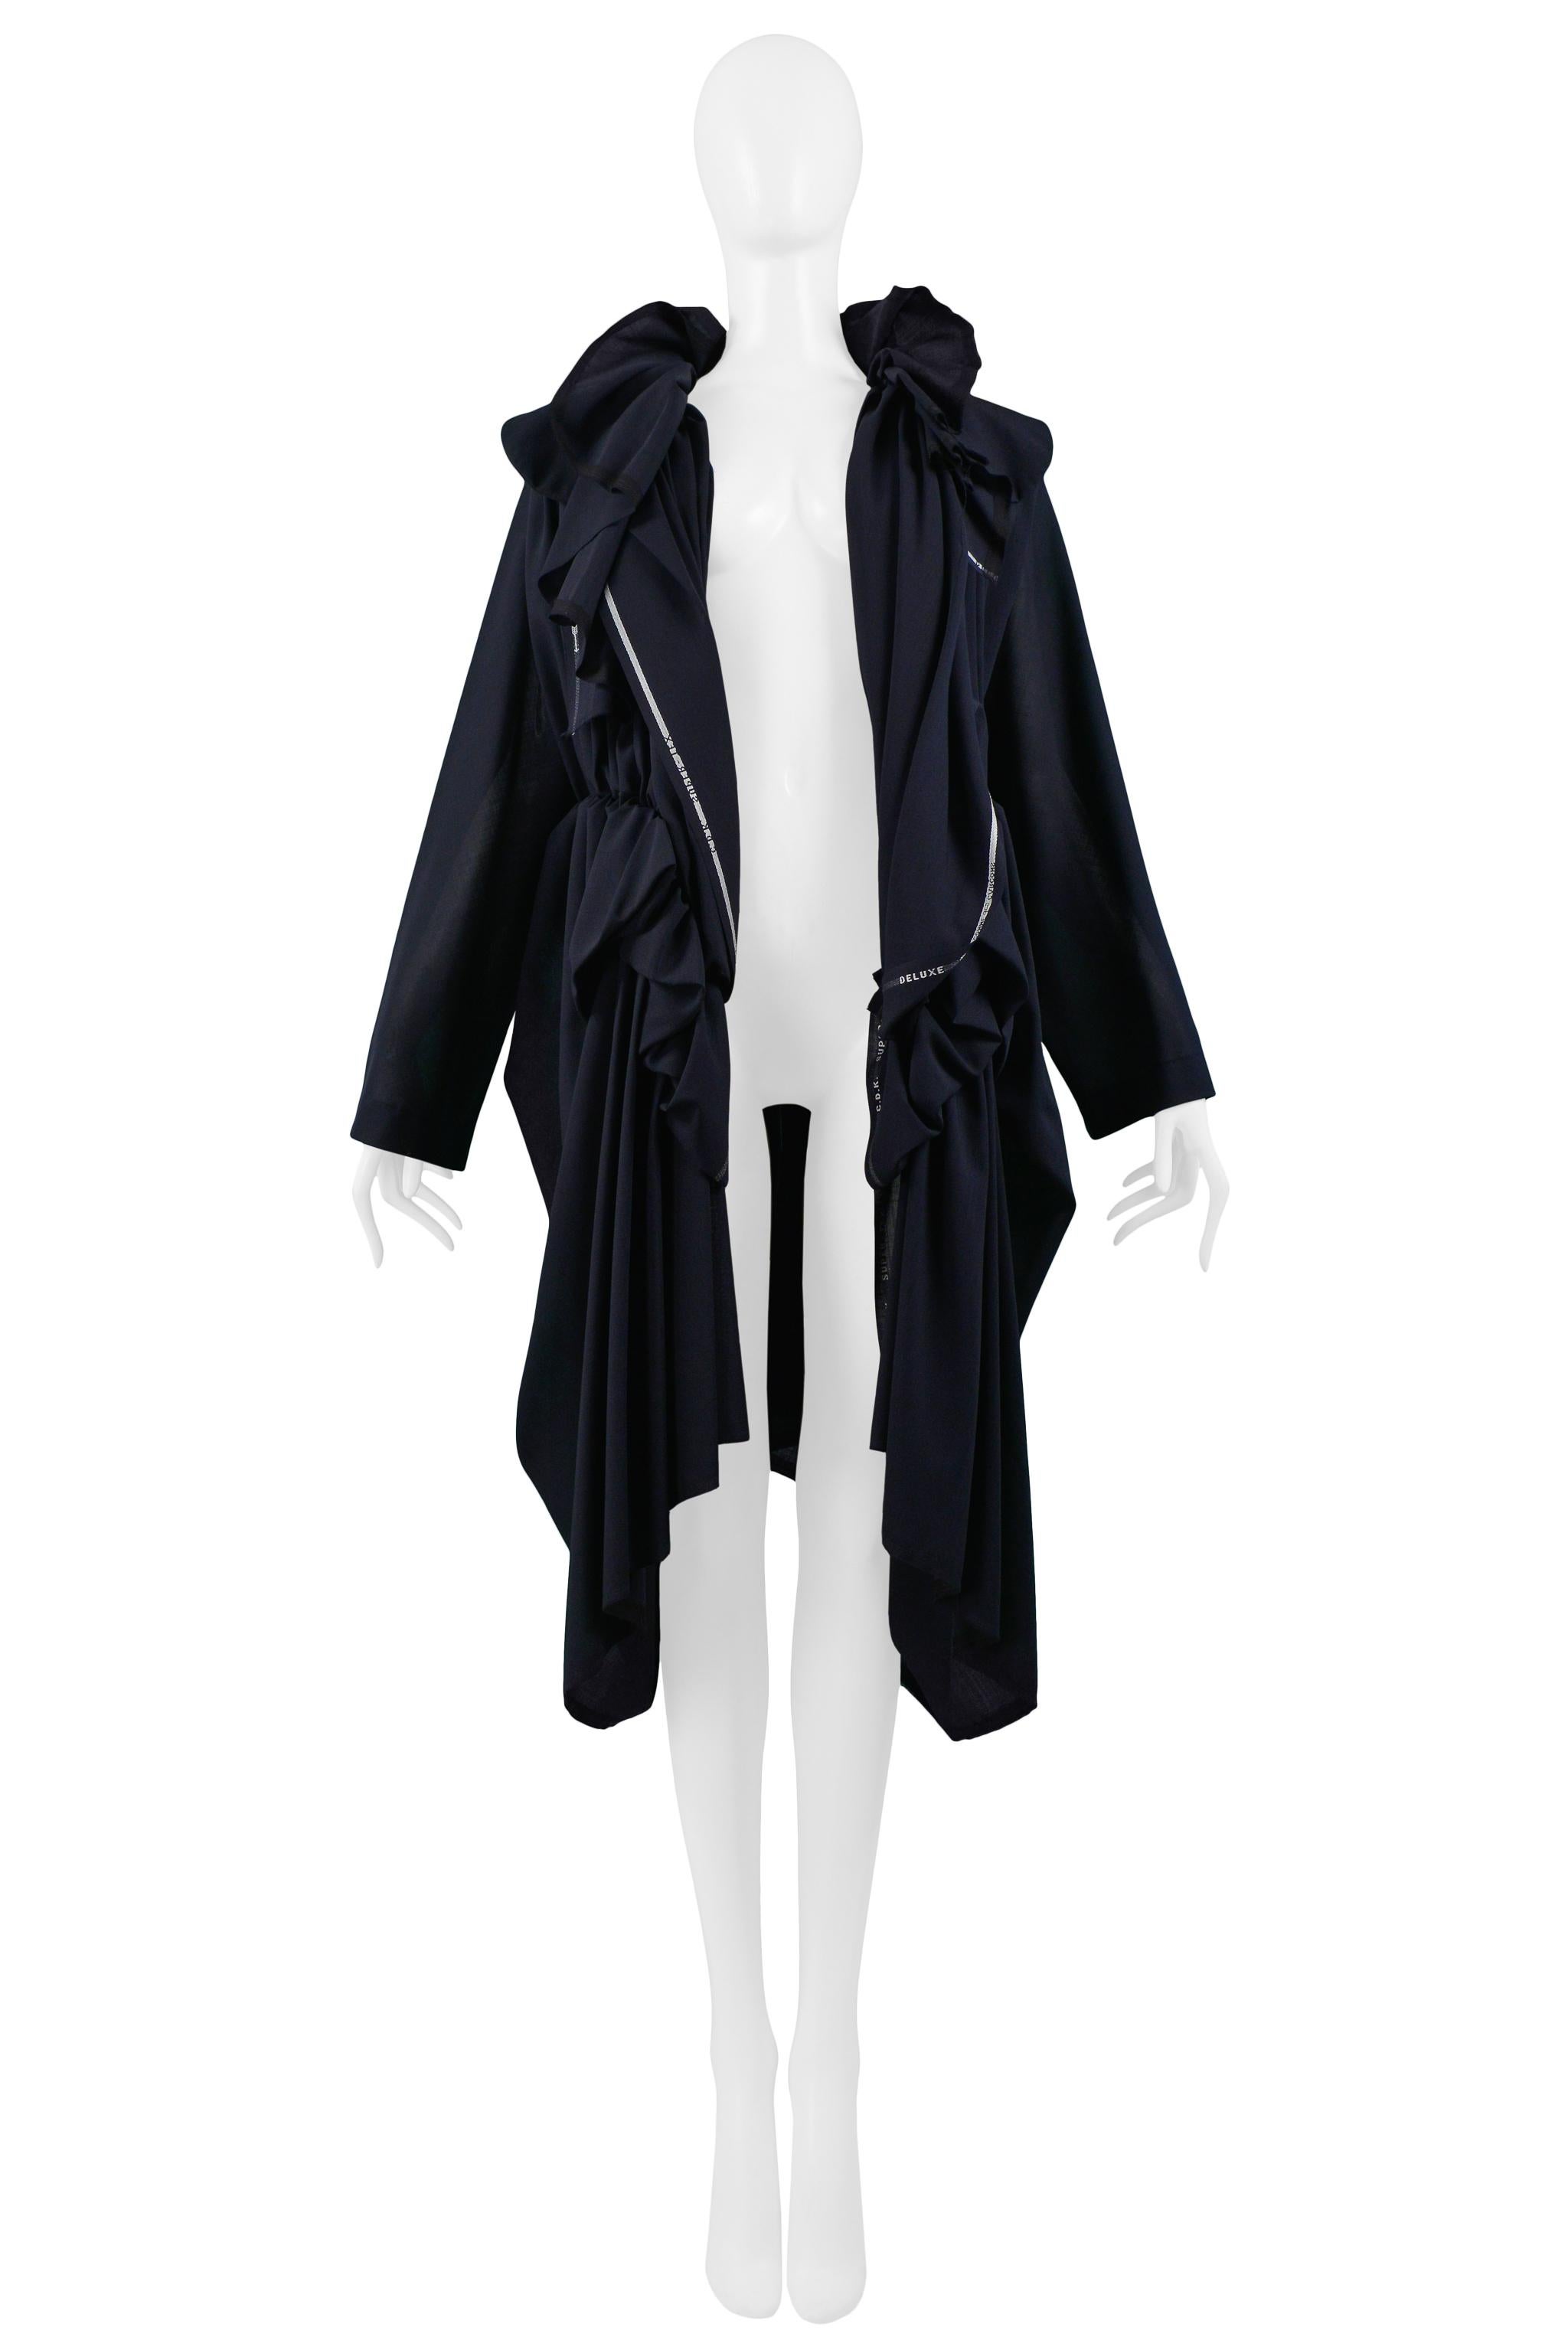 Resurrection Vintage is excited to offer a vintage Comme des Garcons Vintage navy blue deconstructed coat with ruffles at collar and waist, gathers at center back, asymmetrical hemline, and selvage hem throughout. Collection 2005.

Comme Des